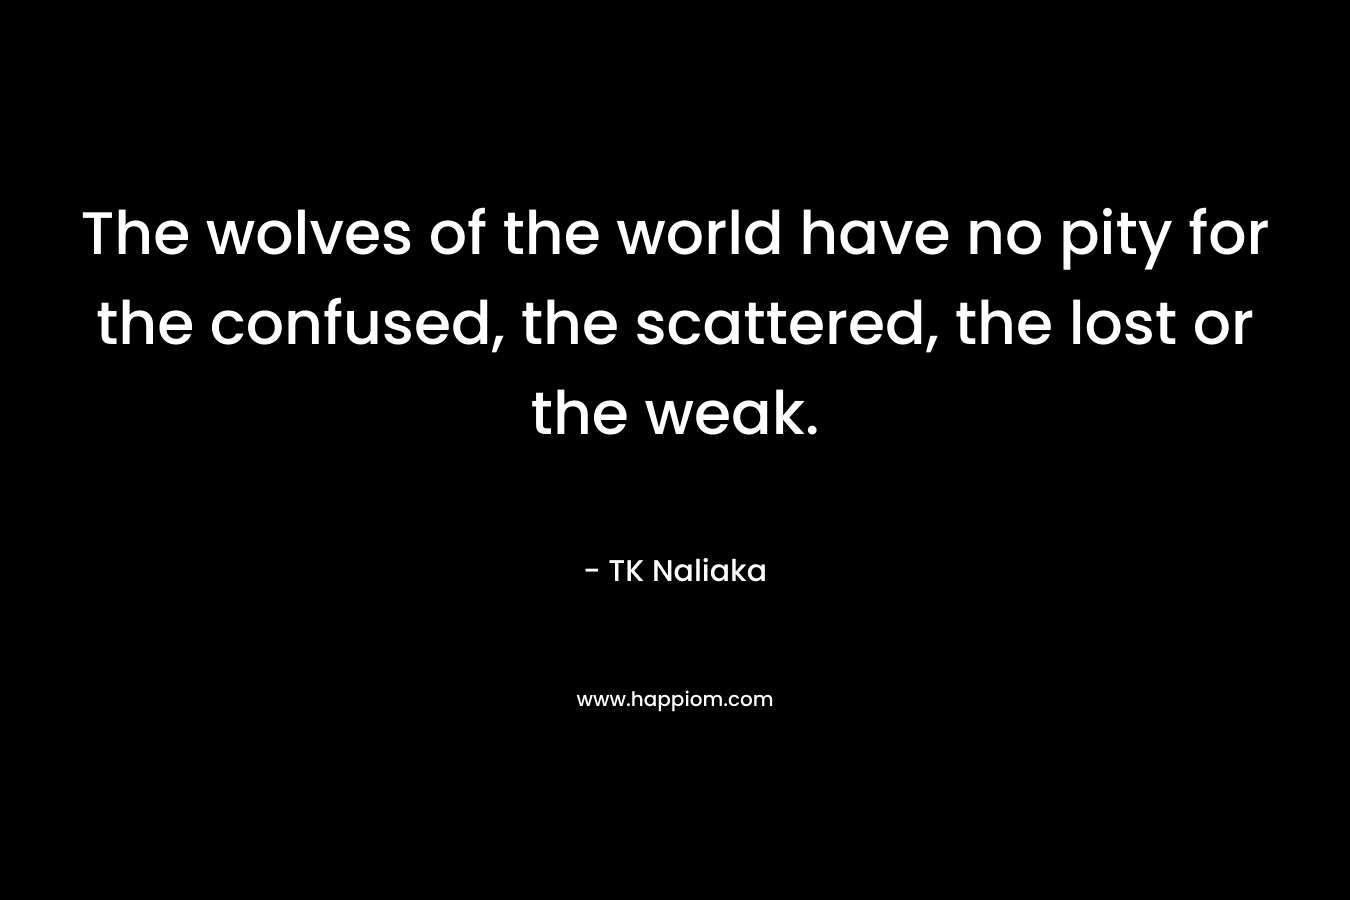 The wolves of the world have no pity for the confused, the scattered, the lost or the weak. – TK Naliaka